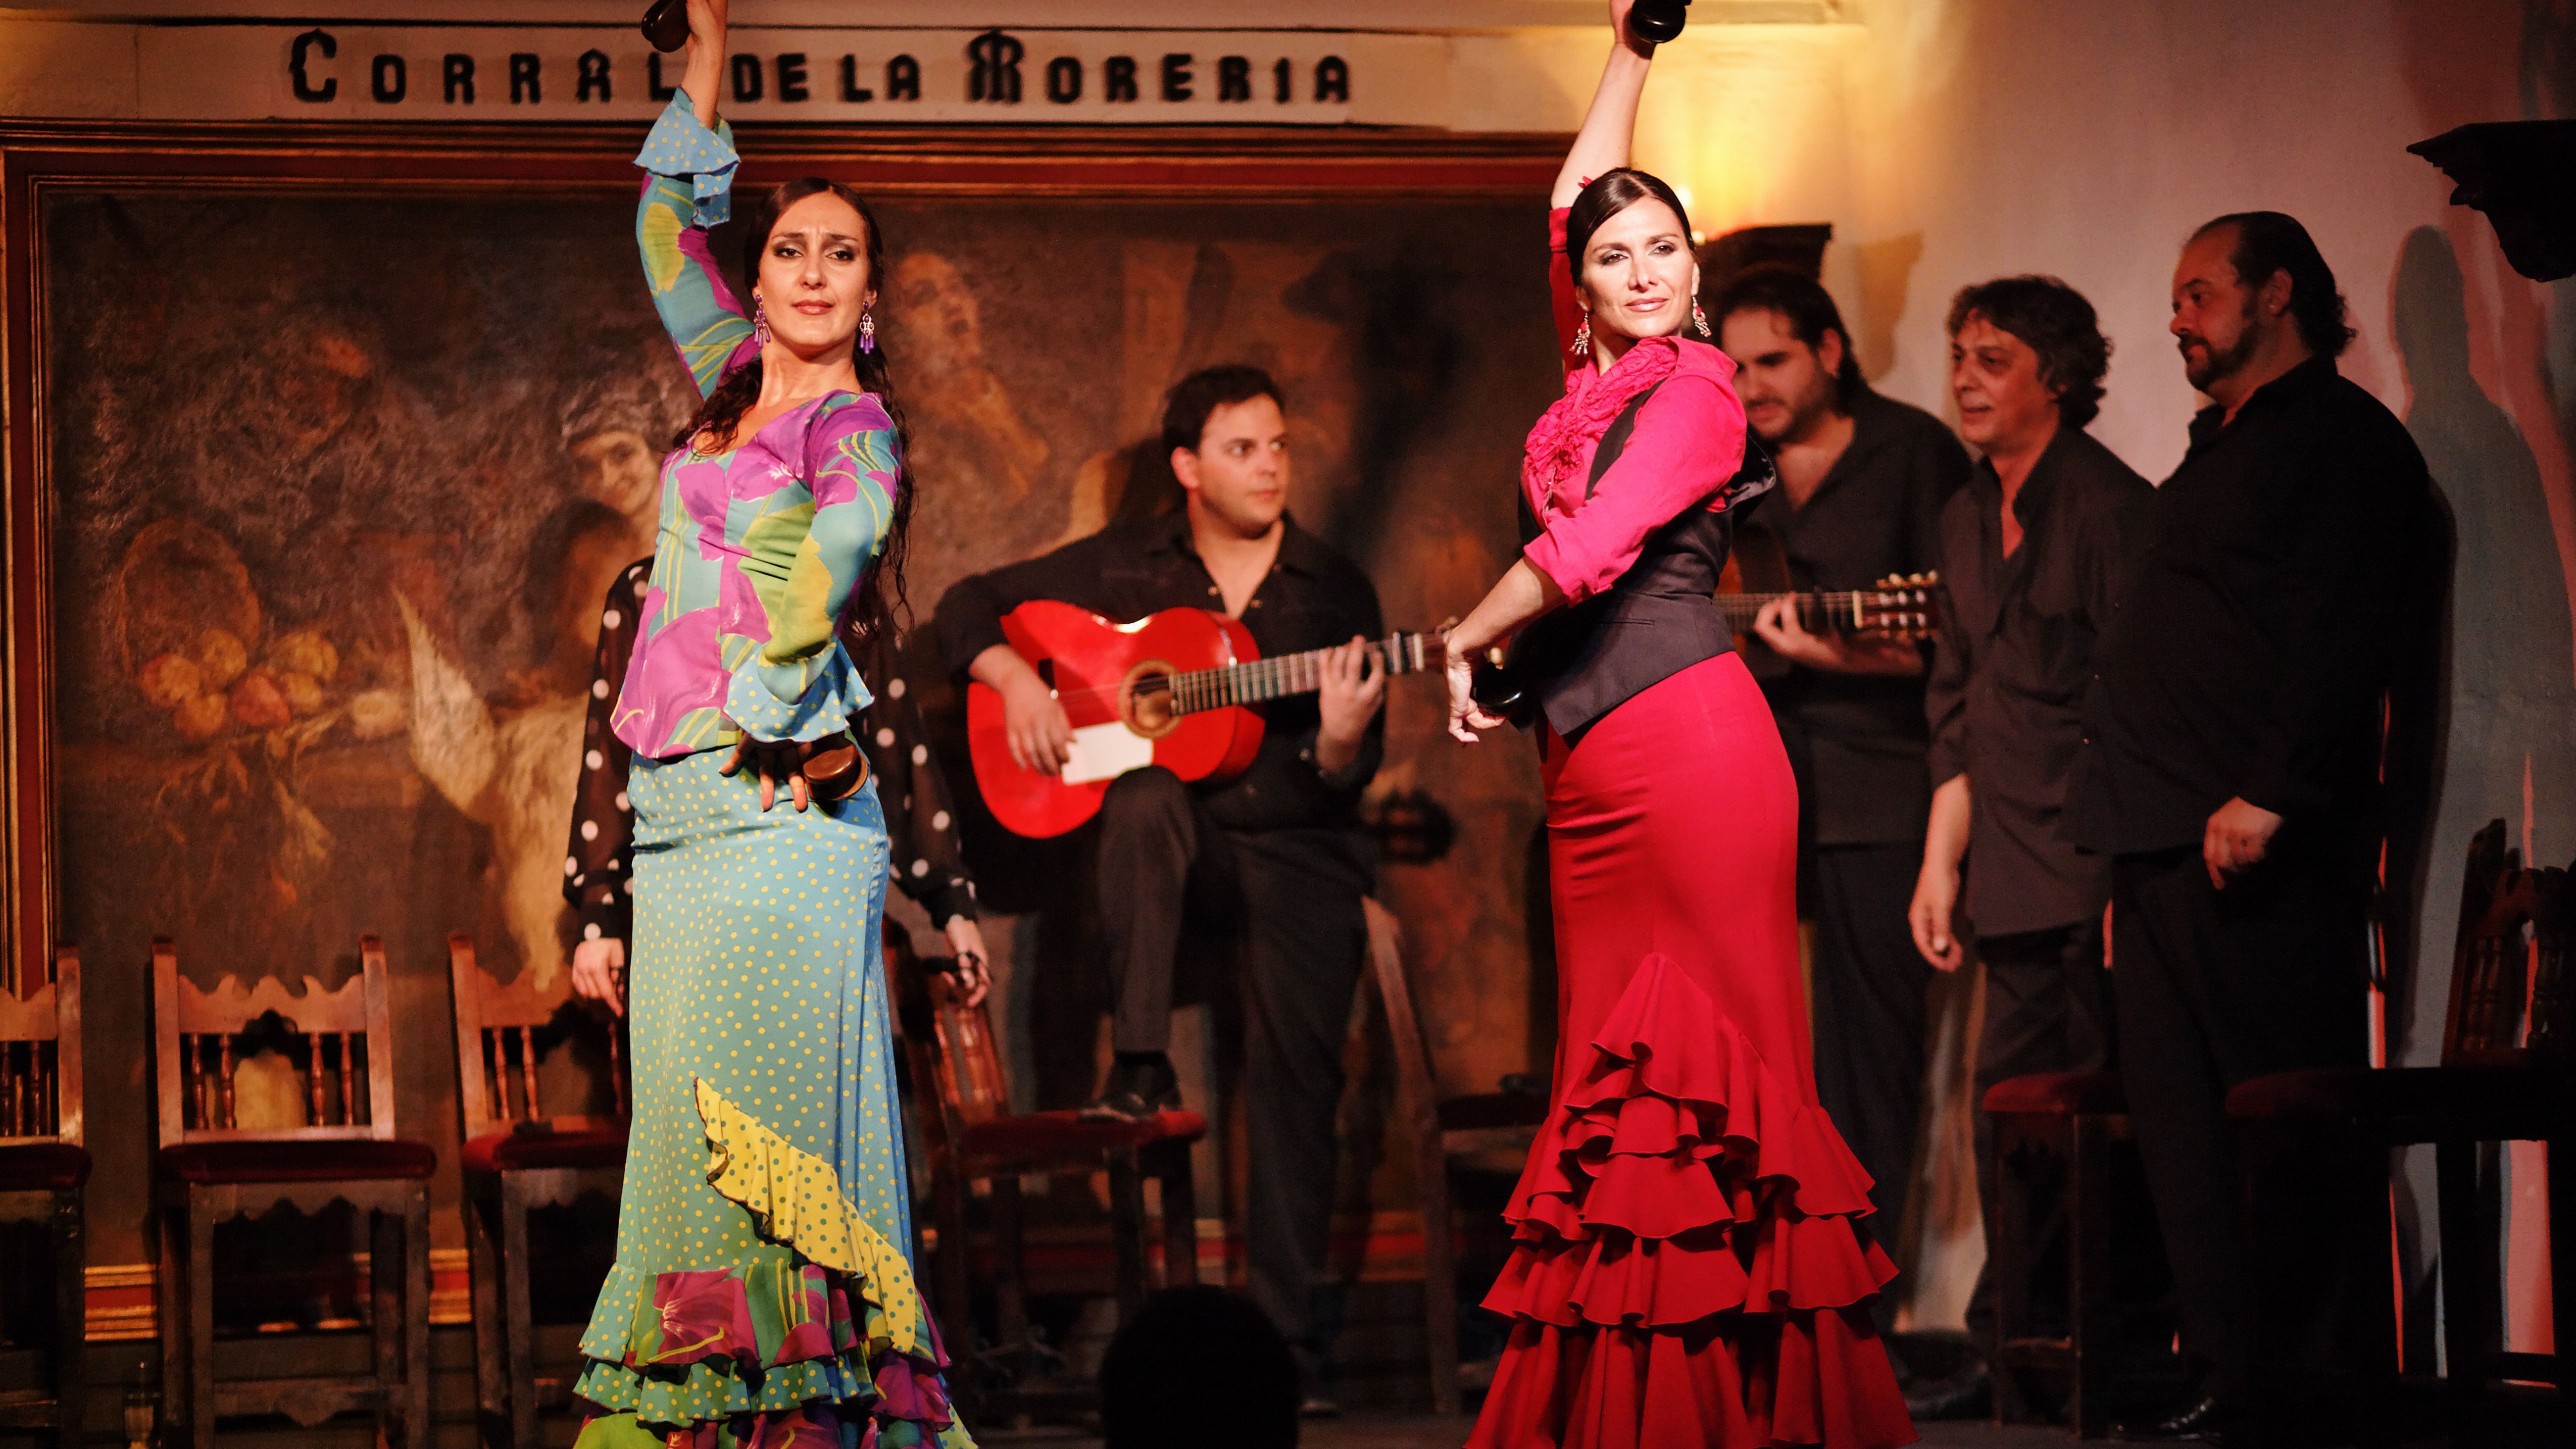 Flamenco dancers performing at a show in Barcelona